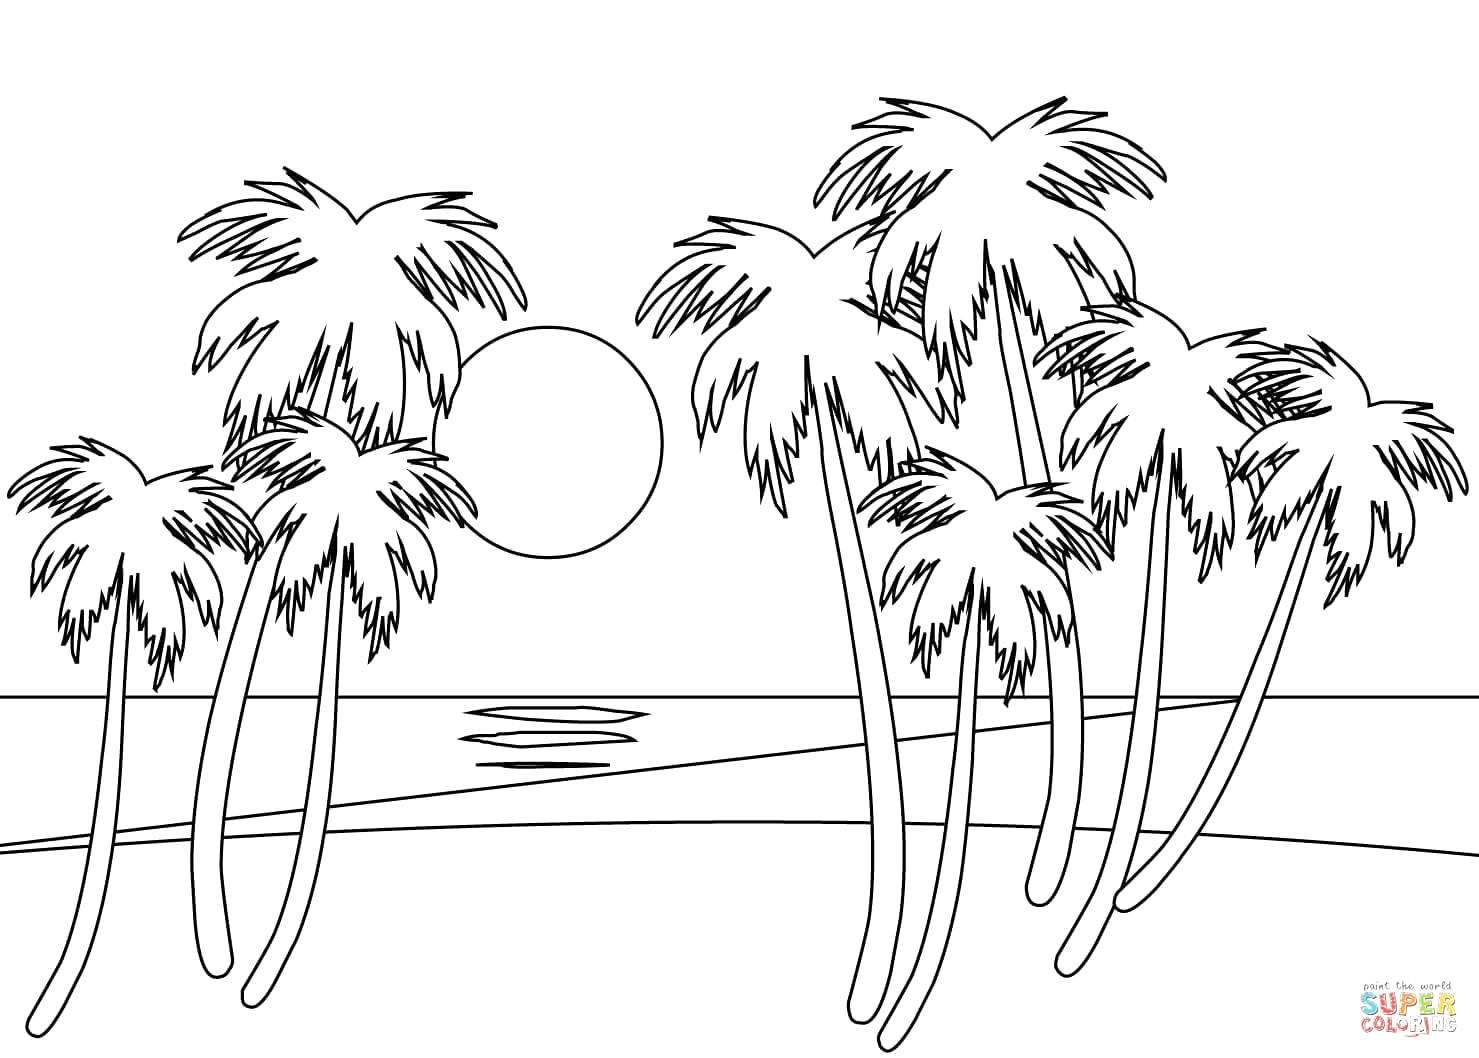 Sunset Coloring Pages
 Tropical Sunset Pages Coloring Pages